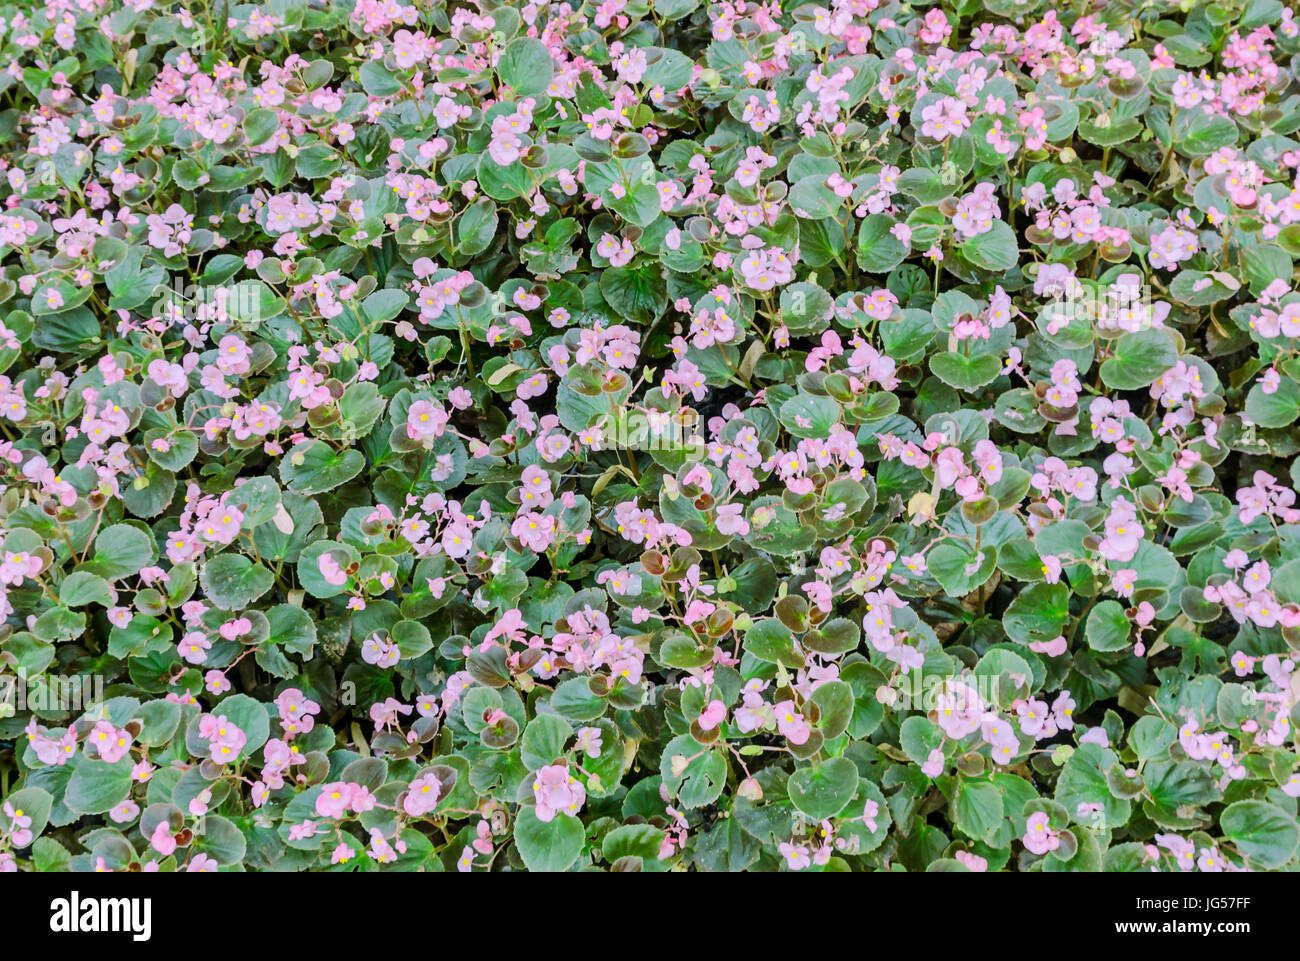 Field with small begonia pink flowers, garden bush, family Begoniaceae, close up. Stock Photo